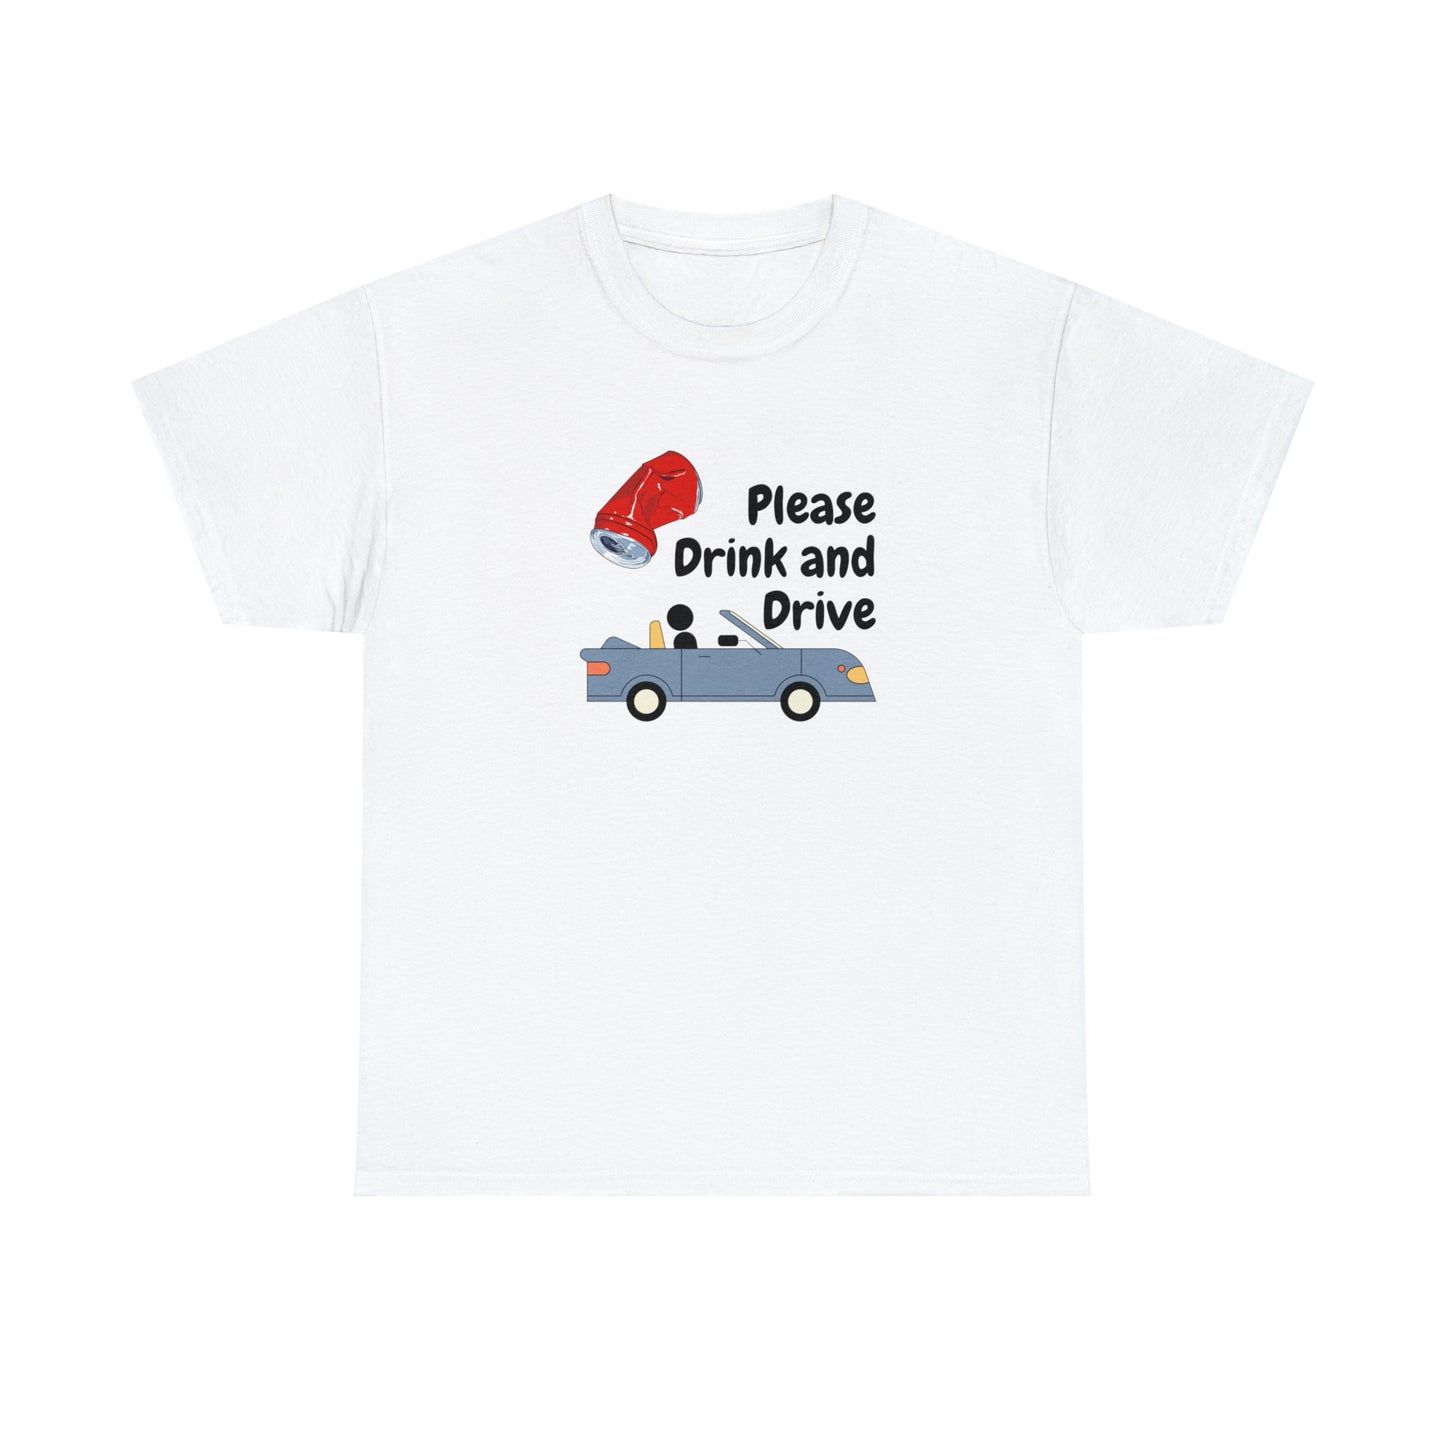 Please Drink and Drive T-Shirt